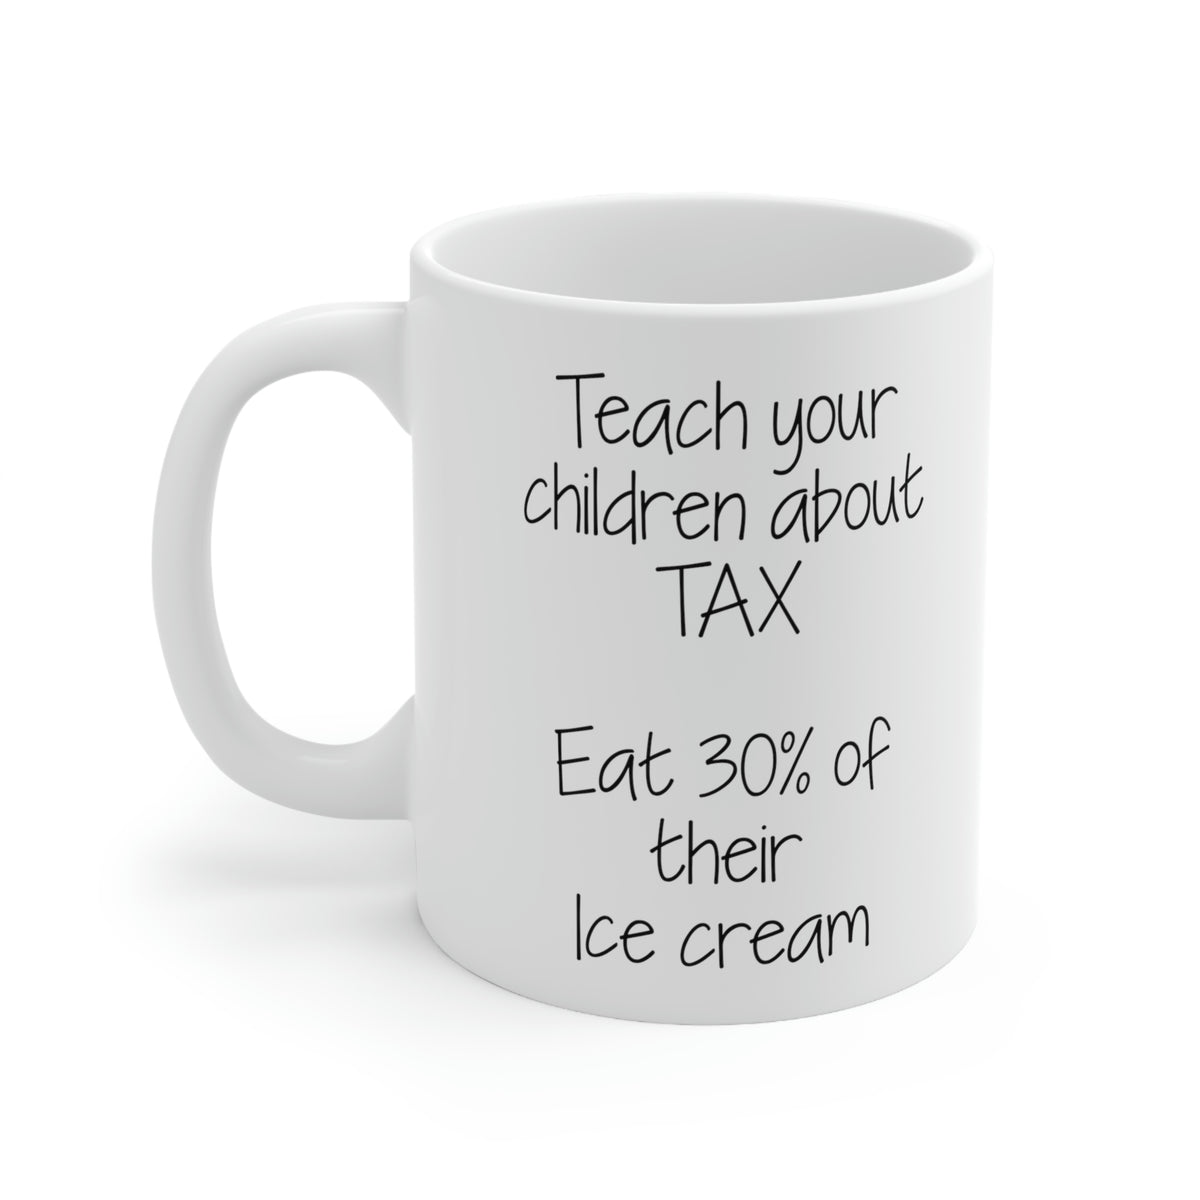 Tax Season Coffee Mug - Teach your children about TAX - Funny Gifts For Tax Accountant Preparer